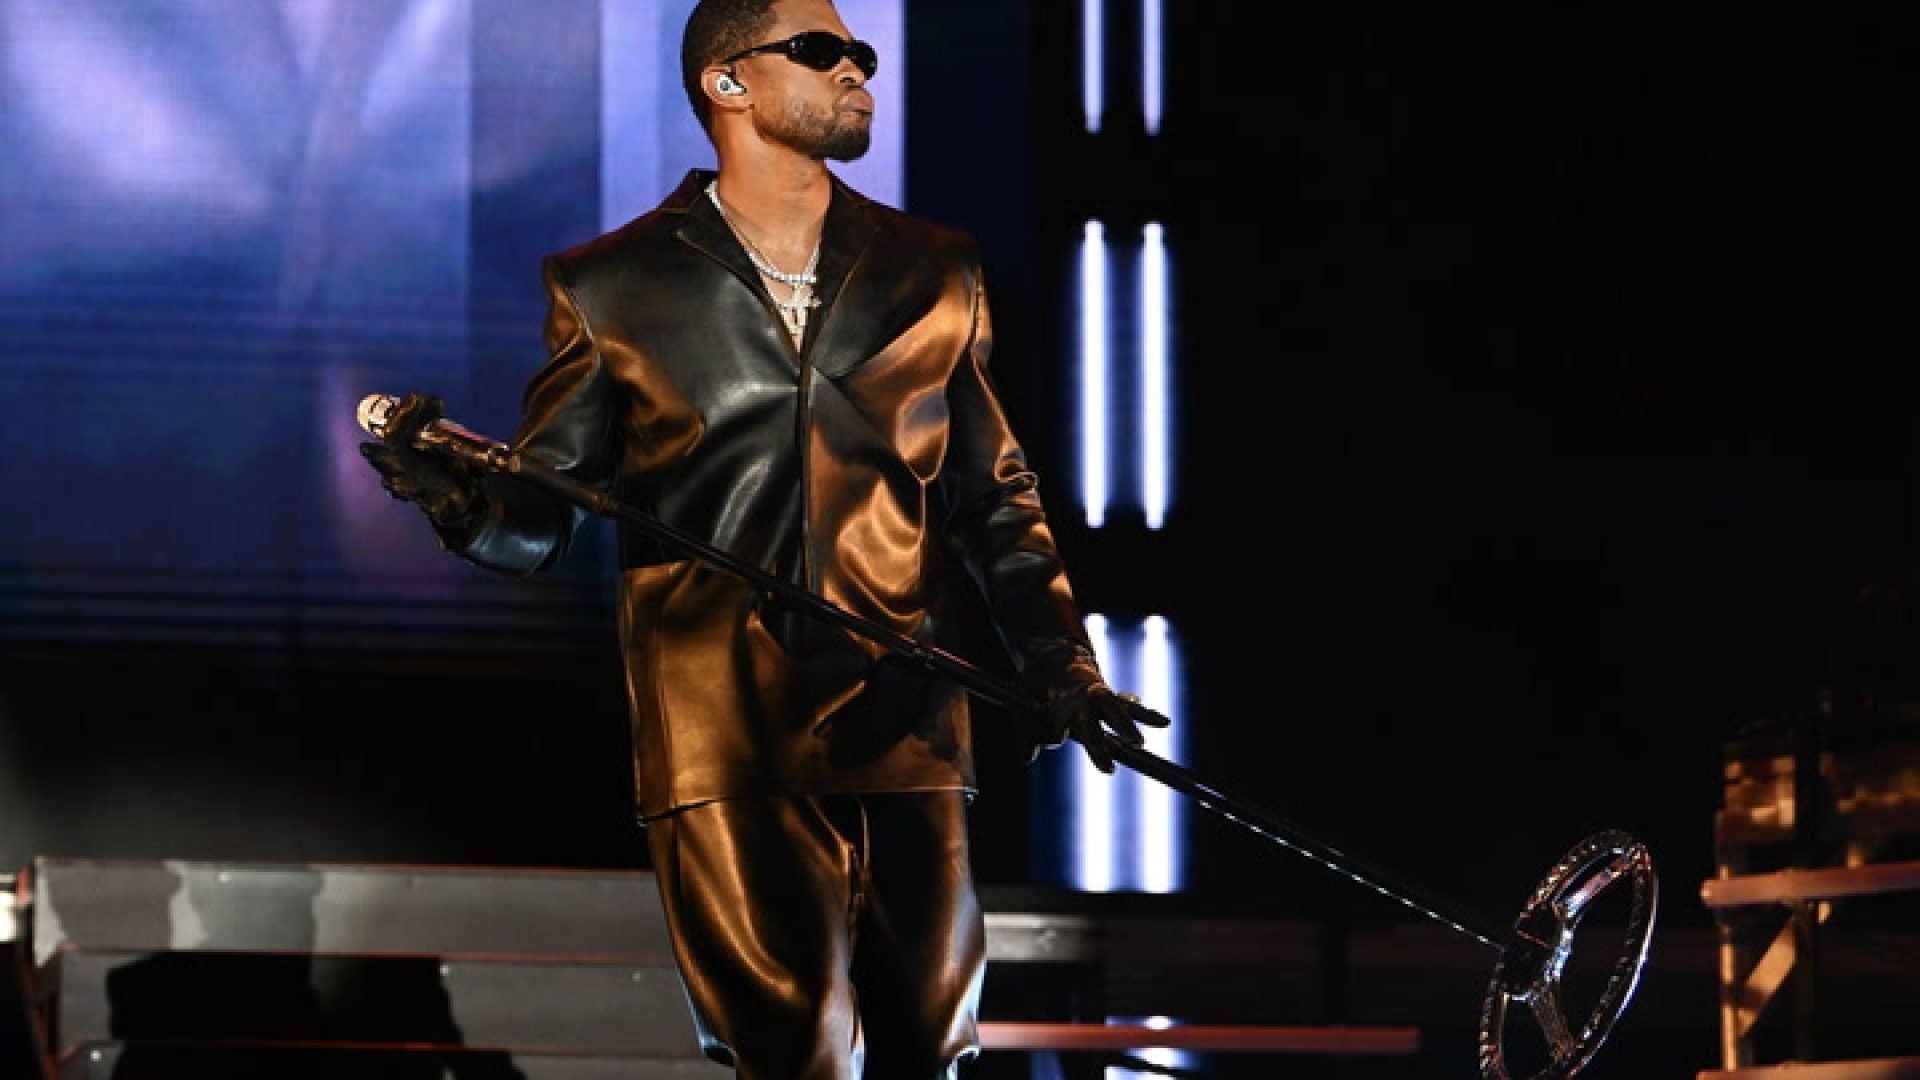 WATCH: Usher Talks Excitement For Upcoming Super Bowl Performance